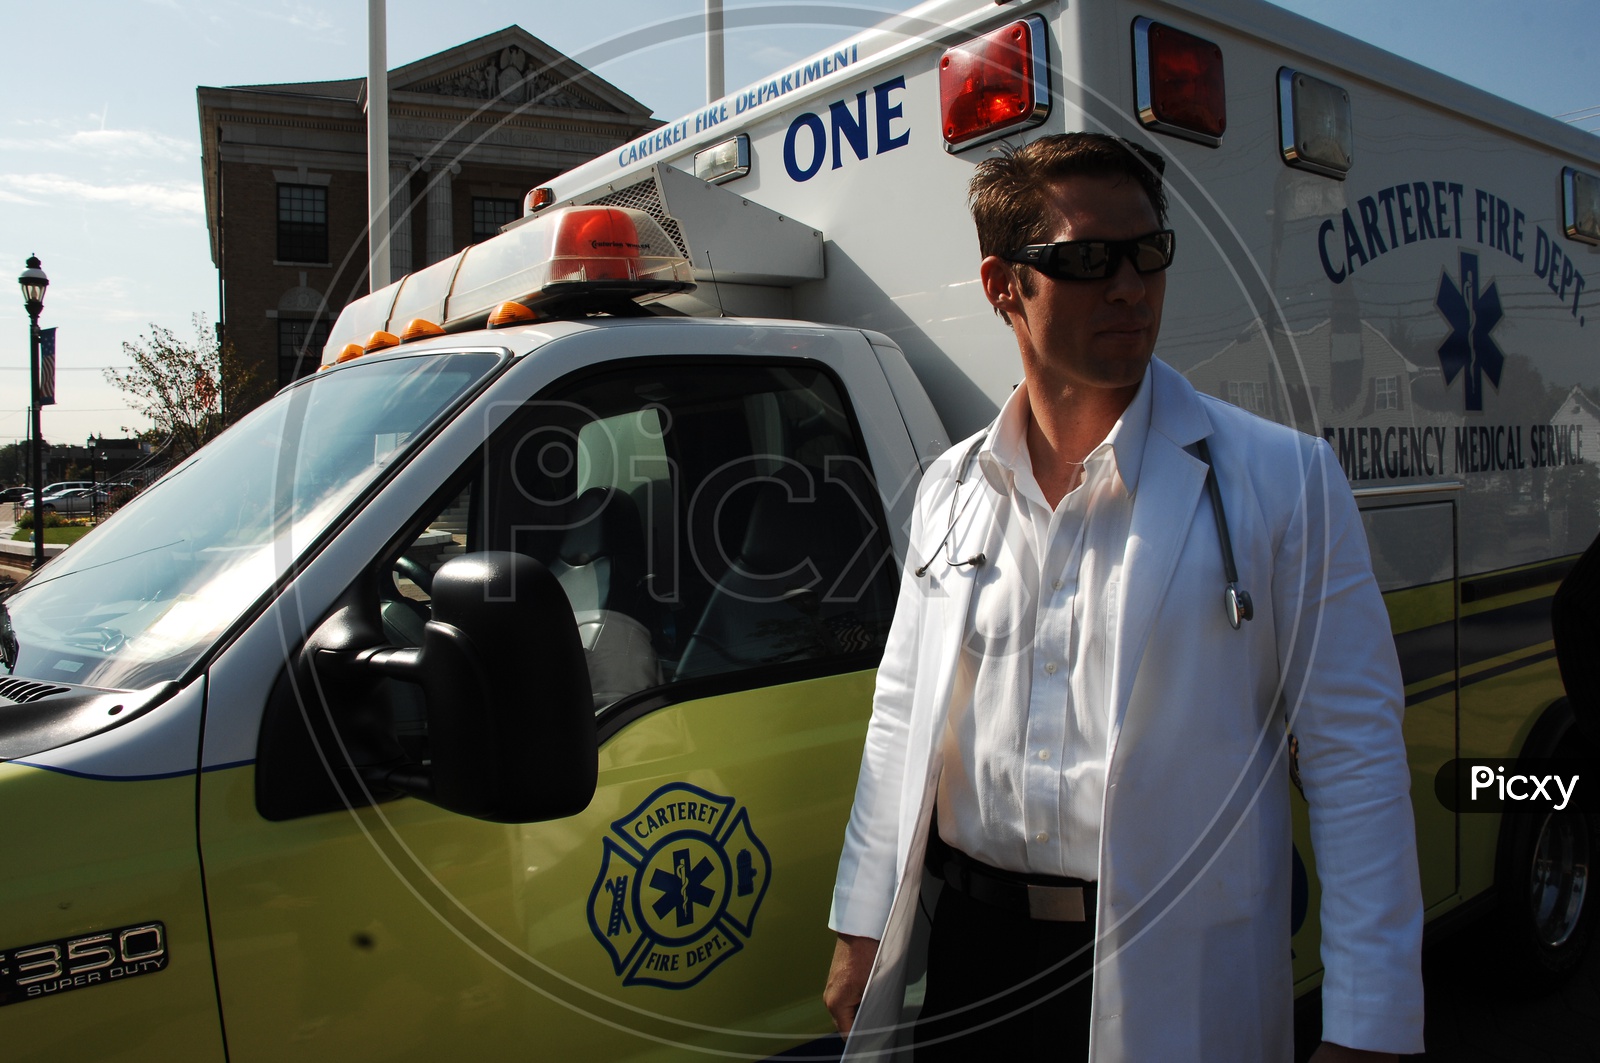 A male doctor standing at the ambulance